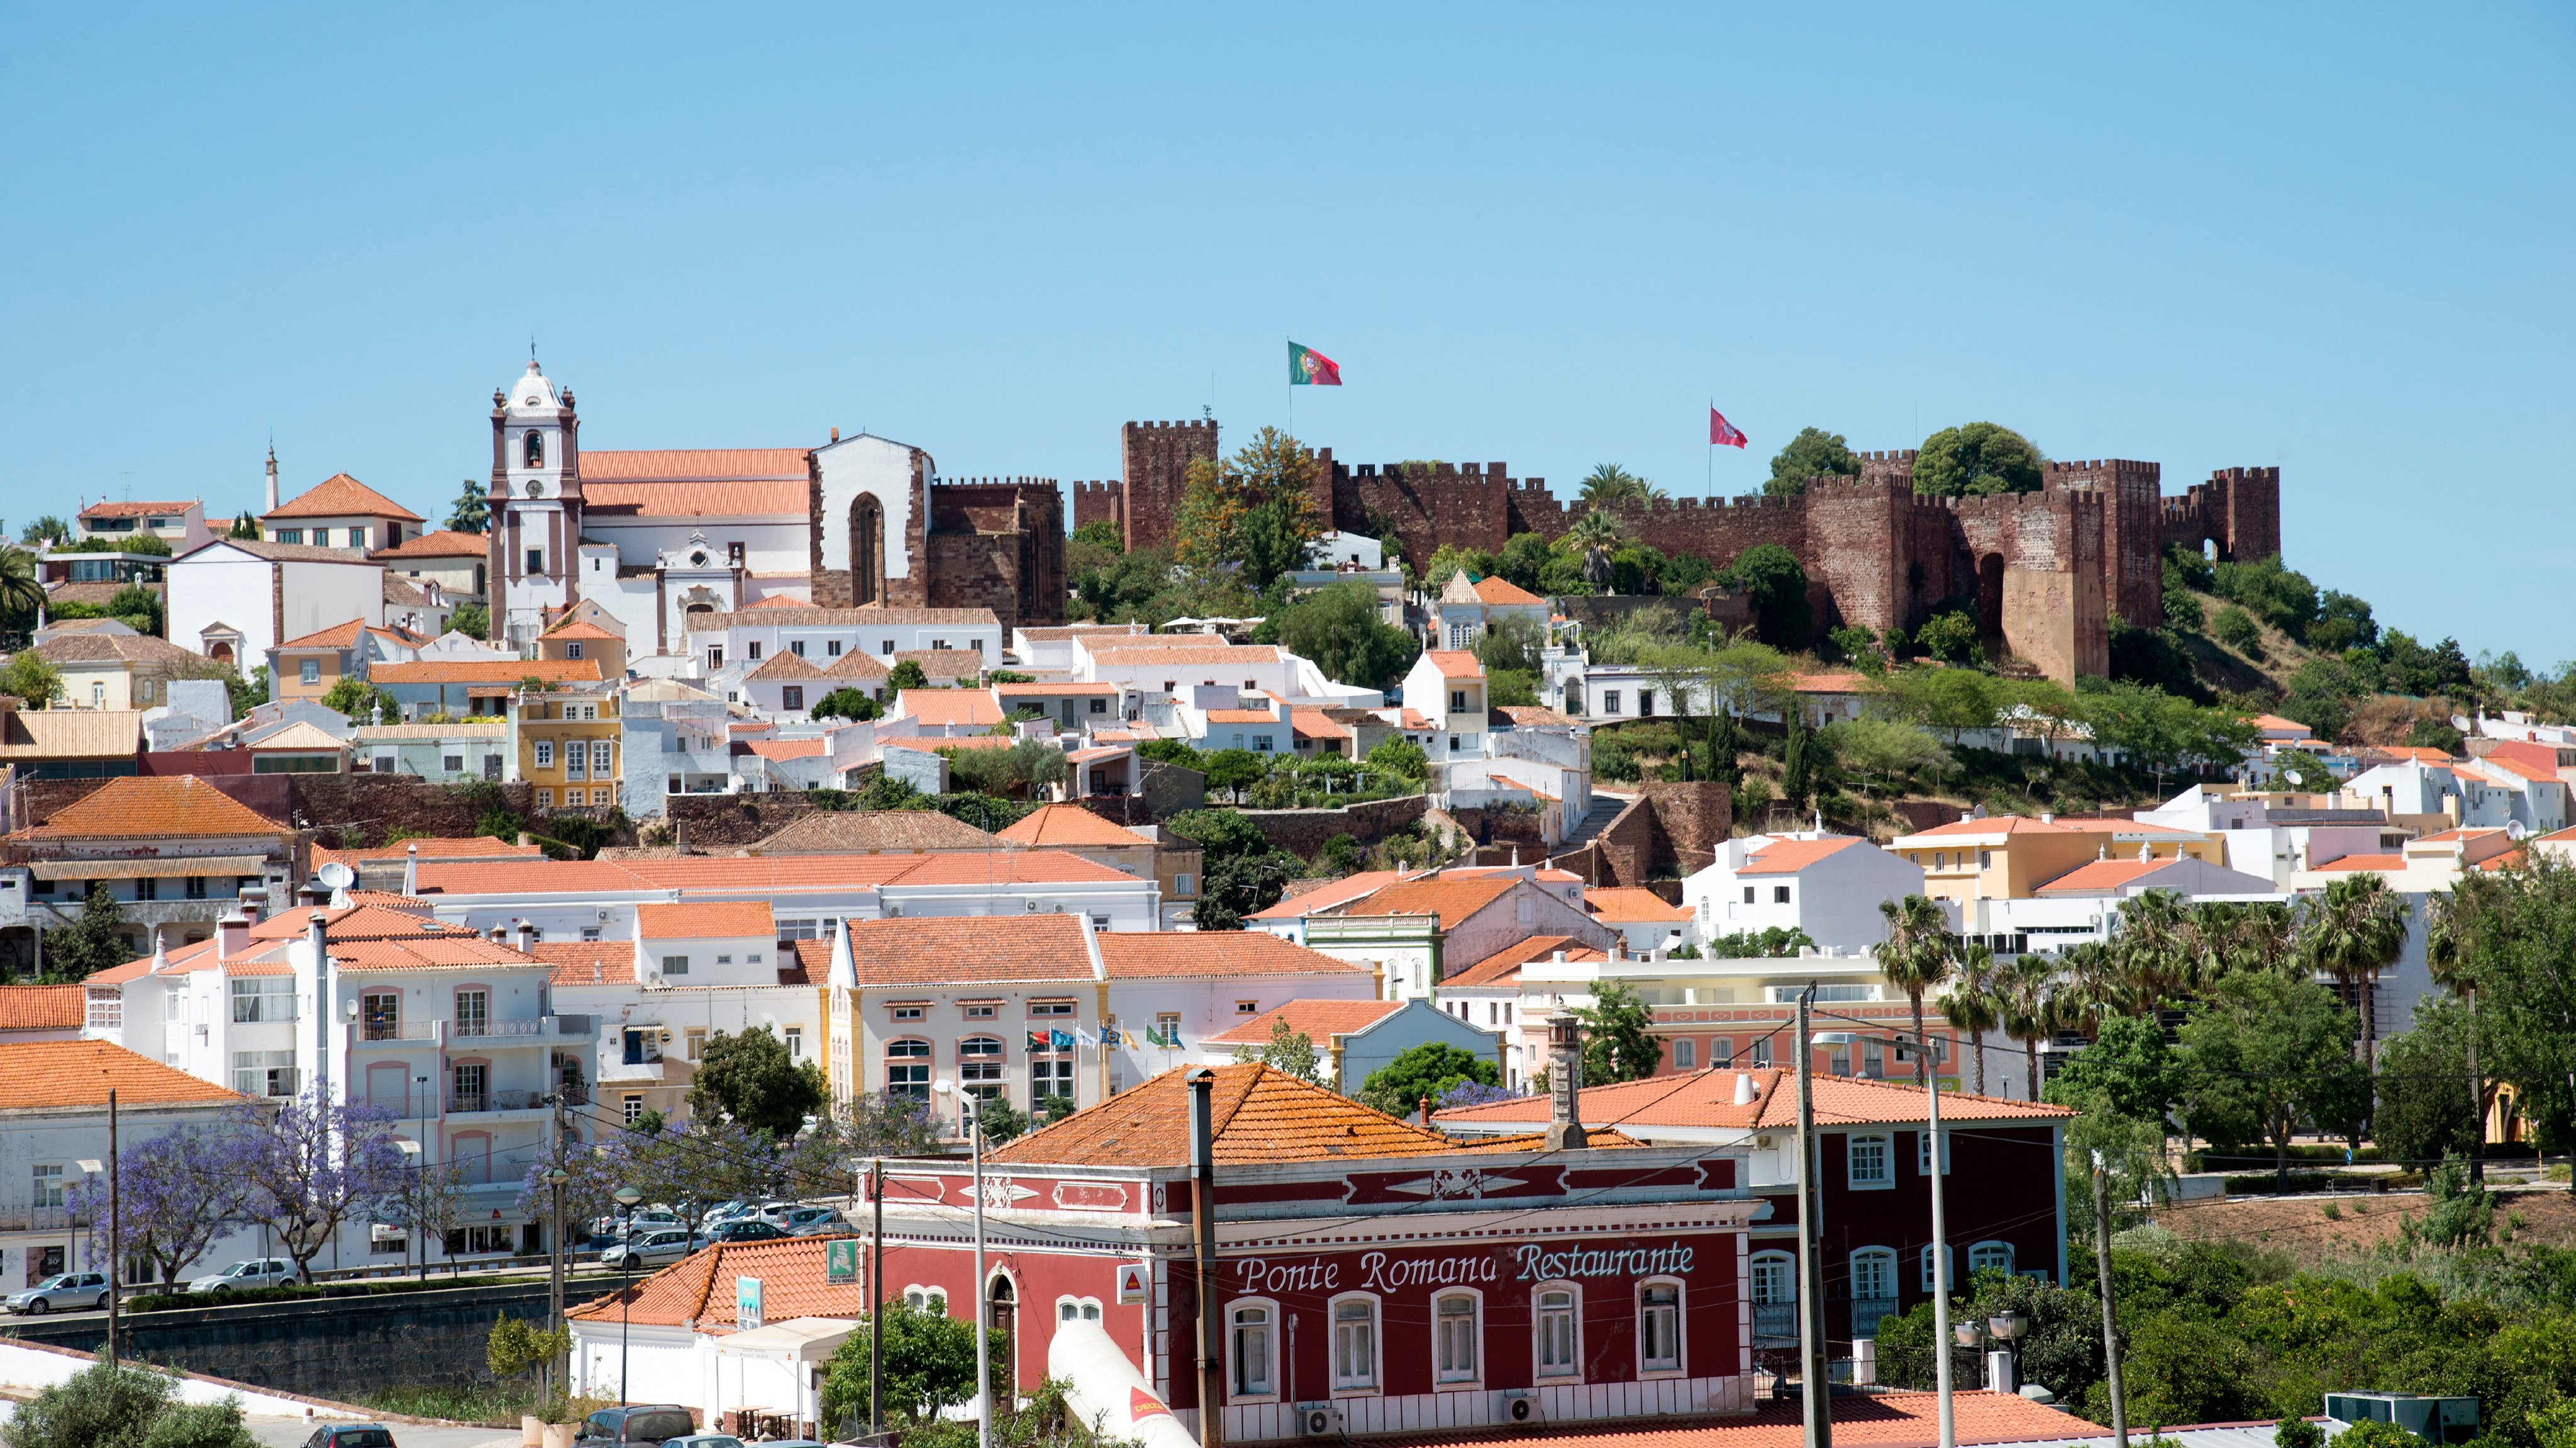 Castle of Silves on a hilltop on the Algarve Portugal